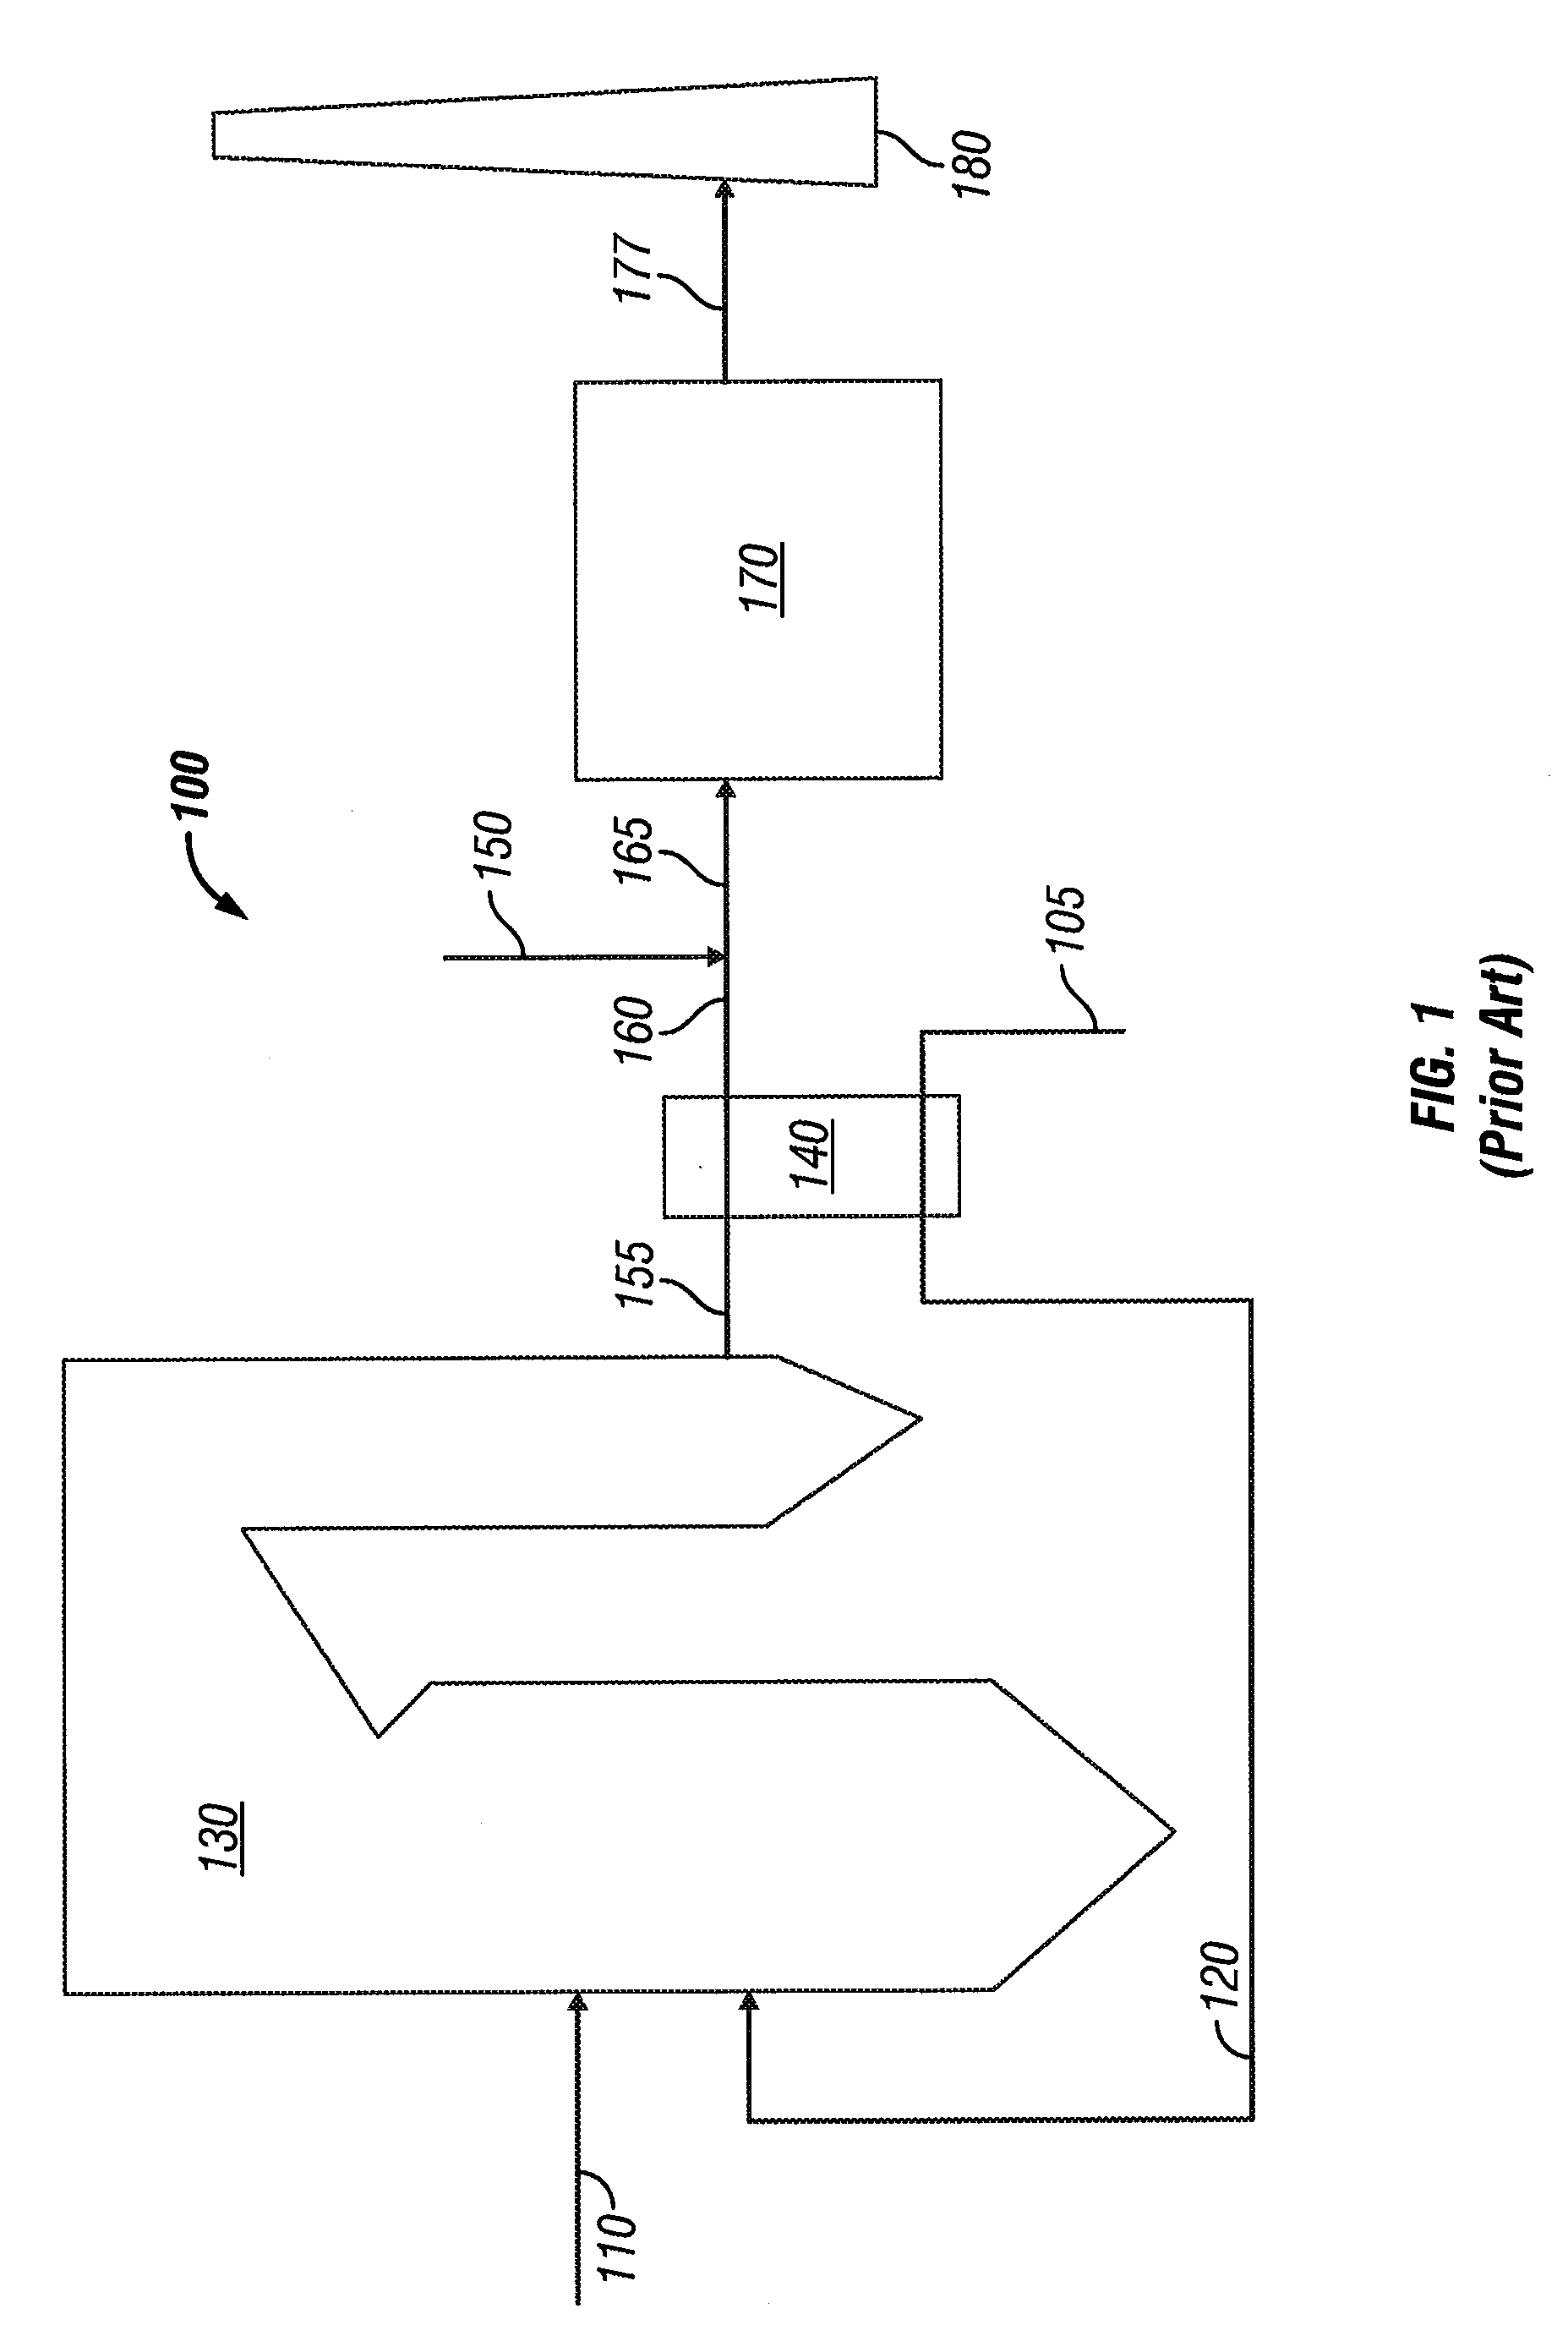 System and method for coproduction of activated carbon and steam/electricity